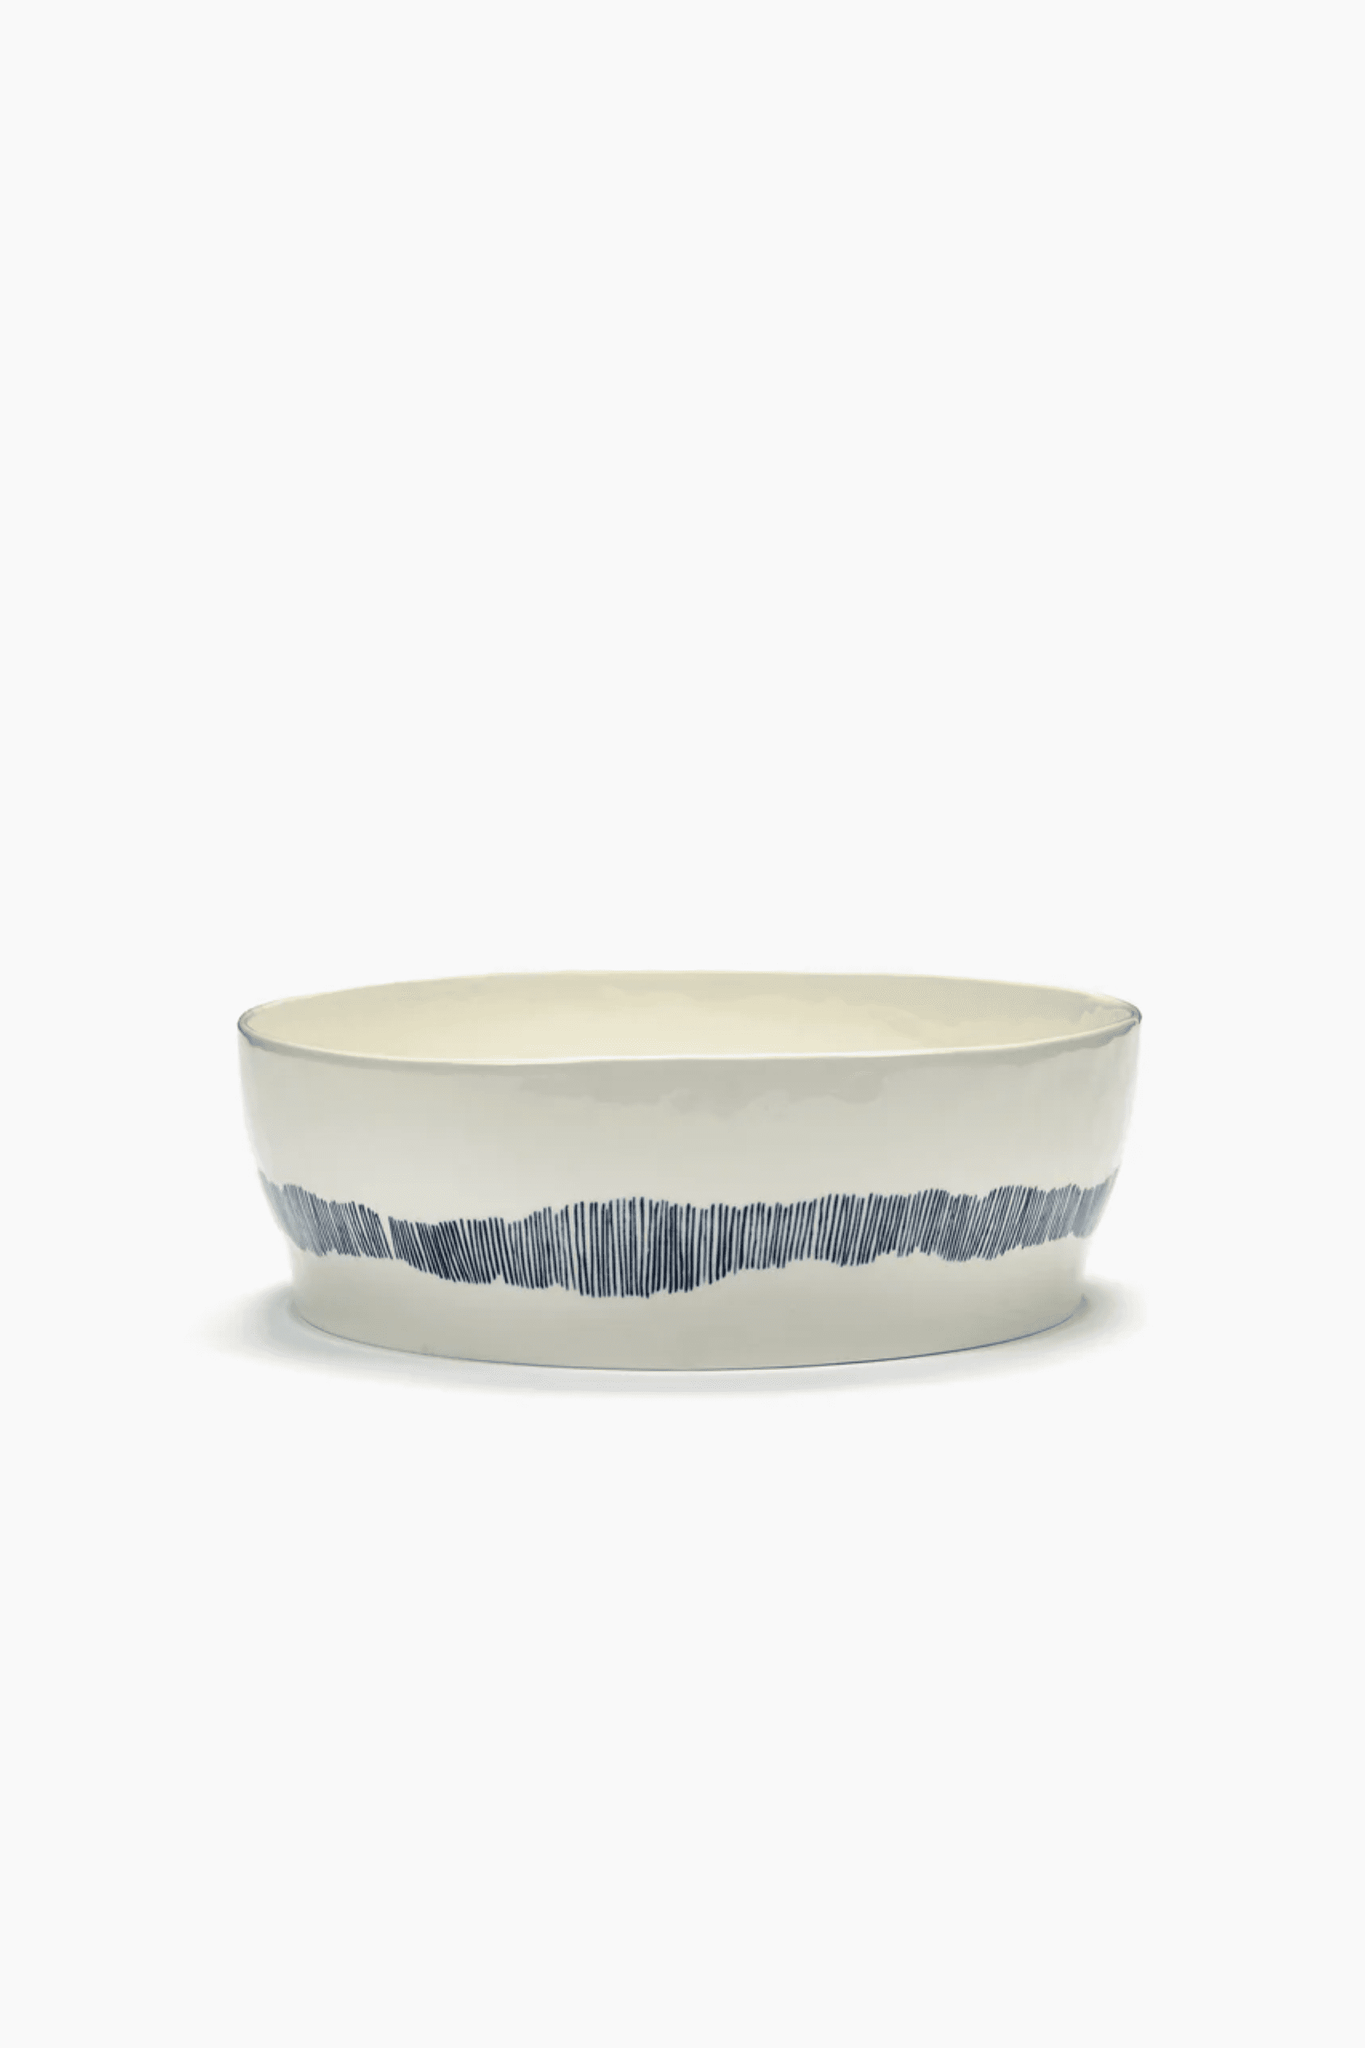 Salad Bowl, White Swirl with Blue Stripes Ottolenghi Serax, side view